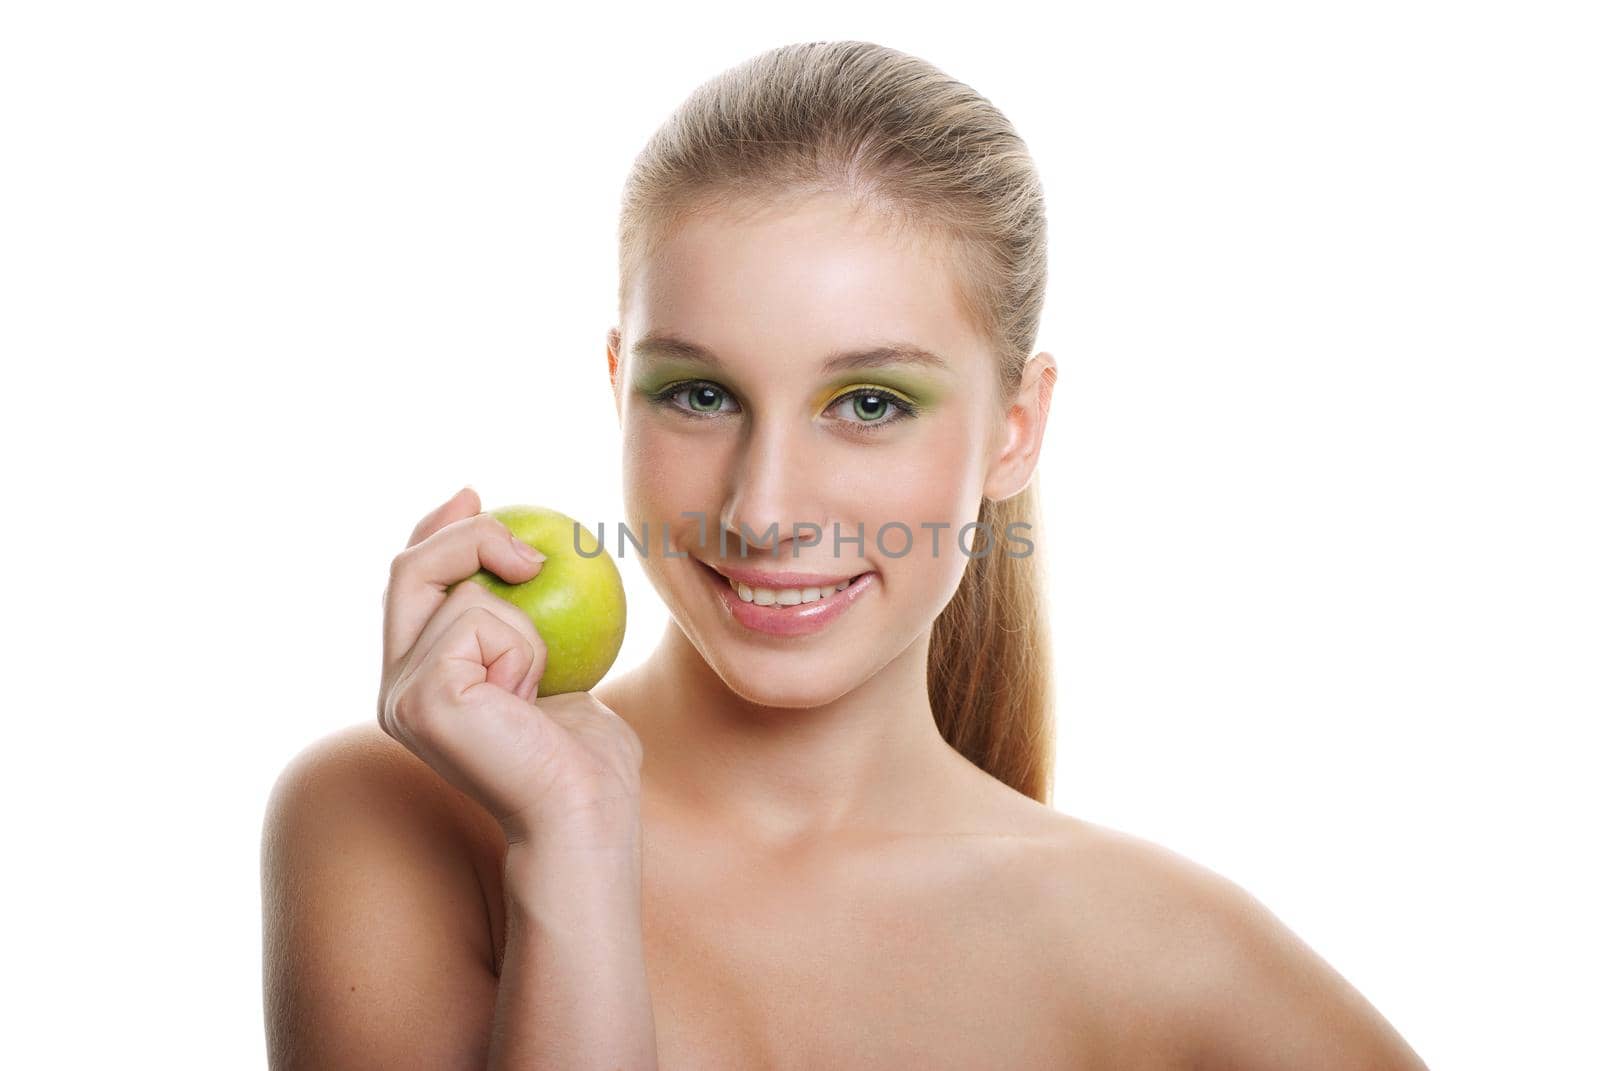 Young happy smiling woman with apple, isolated on white